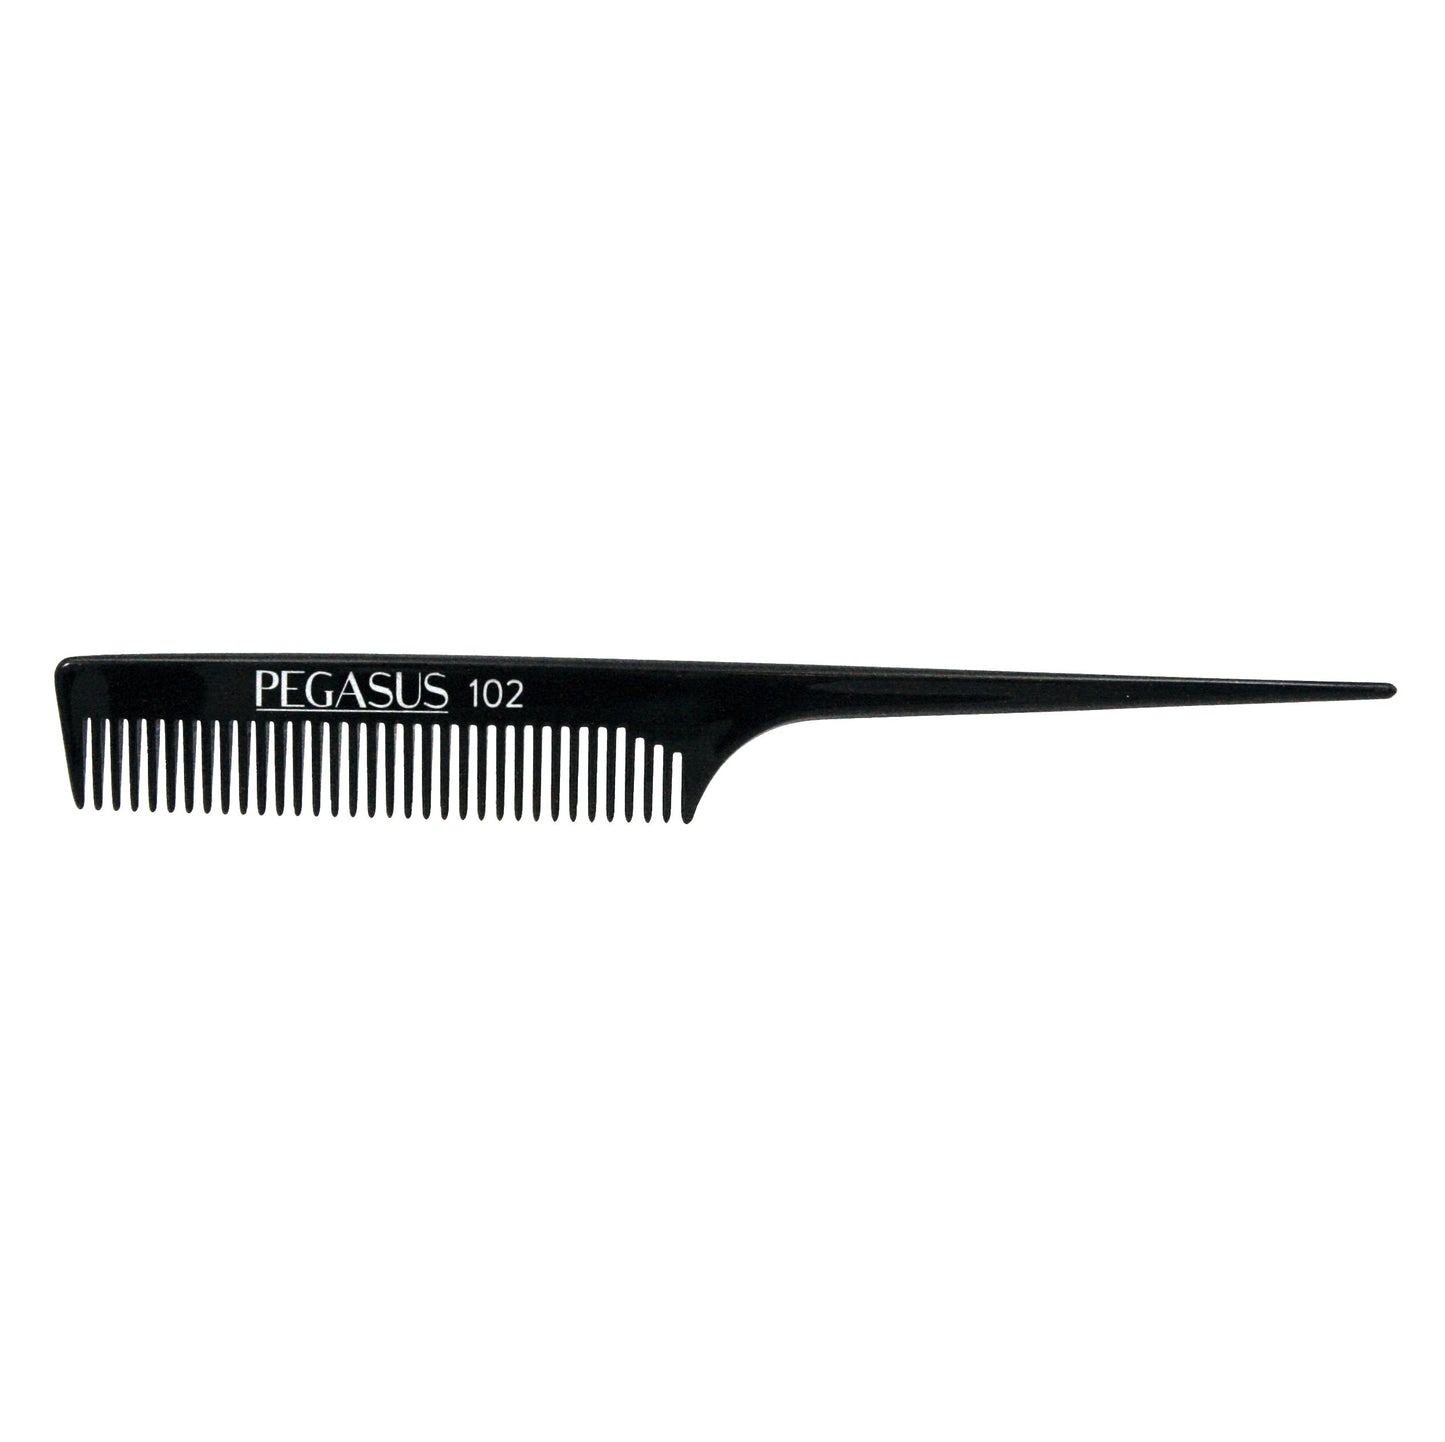 Pegasus 102, 8in Hard Rubber Course Tooth Rat Tail Comb, Handmade, Seamless, Smooth Edges, Anti Static, Heat and Chemically Resistant, Great for Parting, Coloring Hair | Peines de goma dura - Black